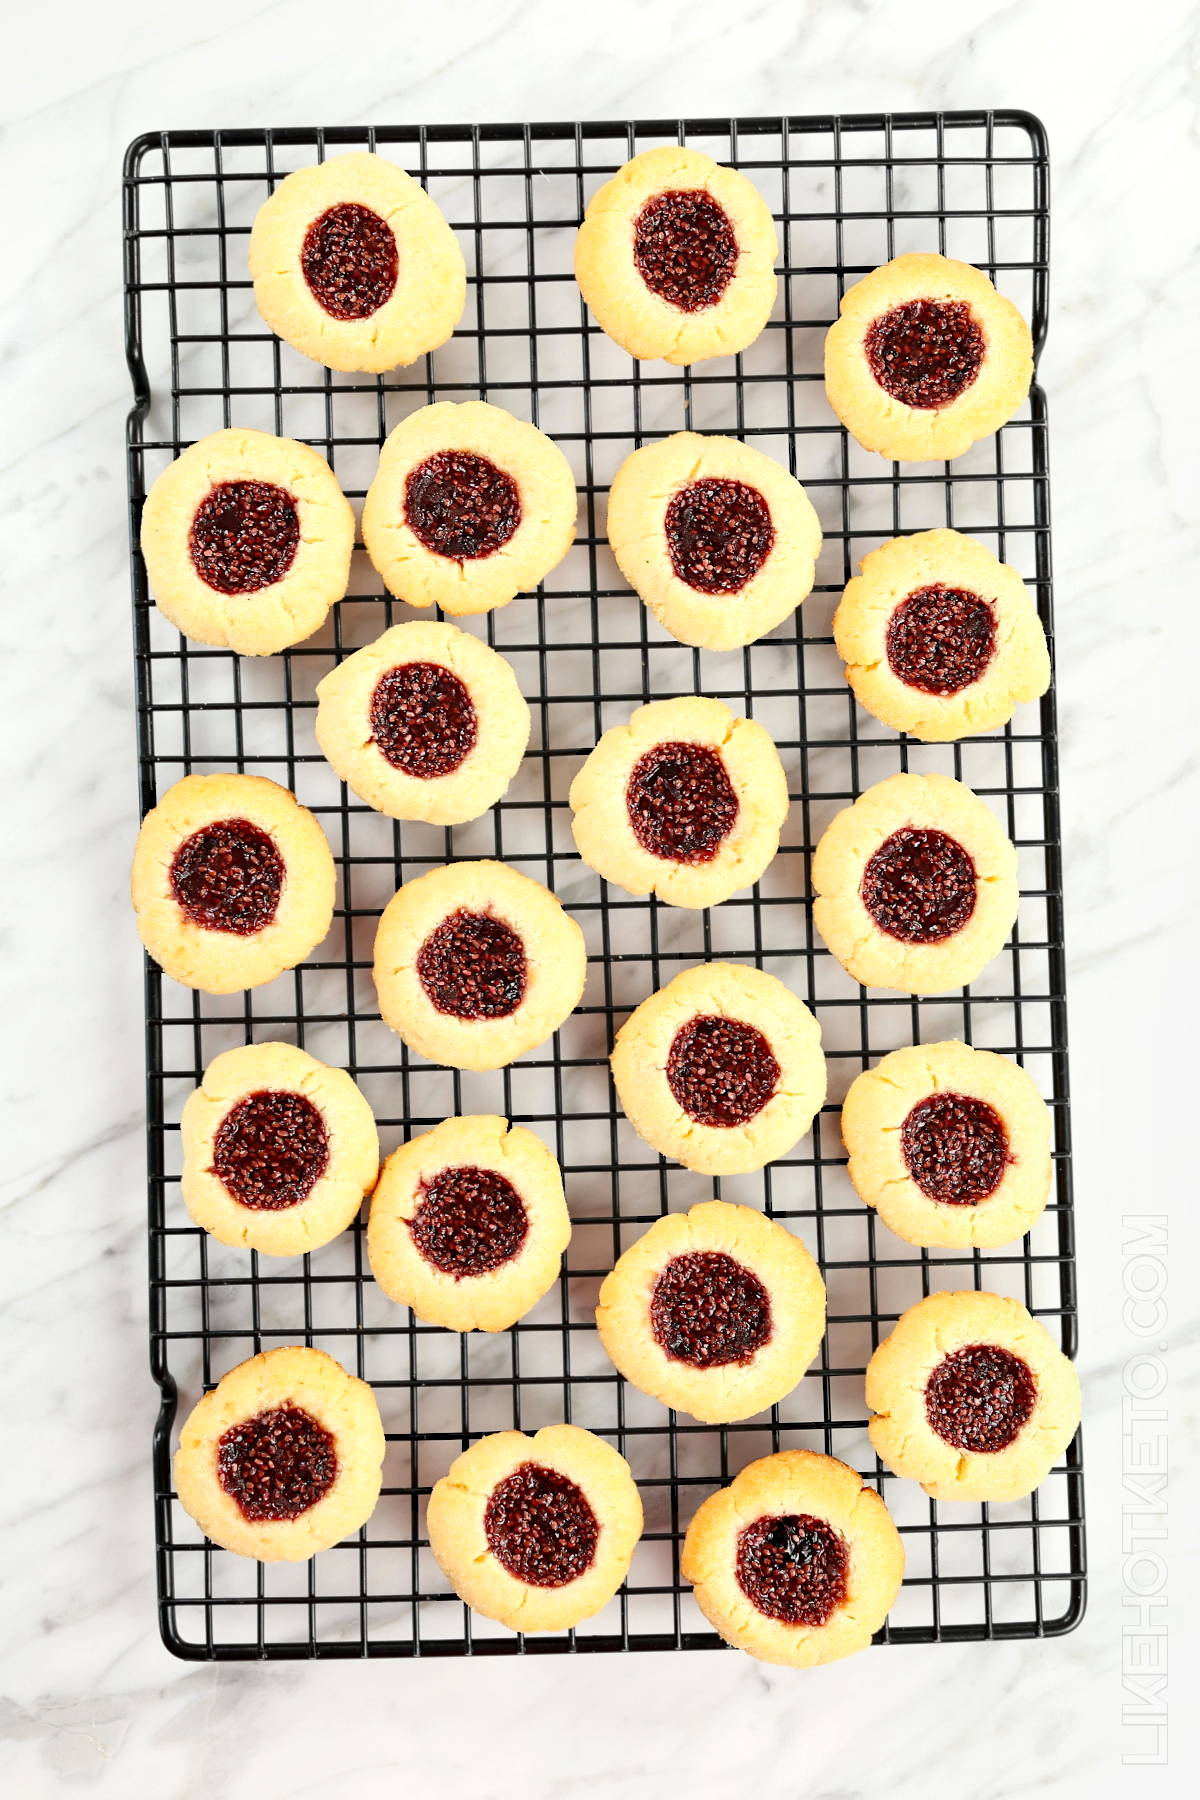 Gluten=free thumbprint jam cookies chilling in cooling rack.